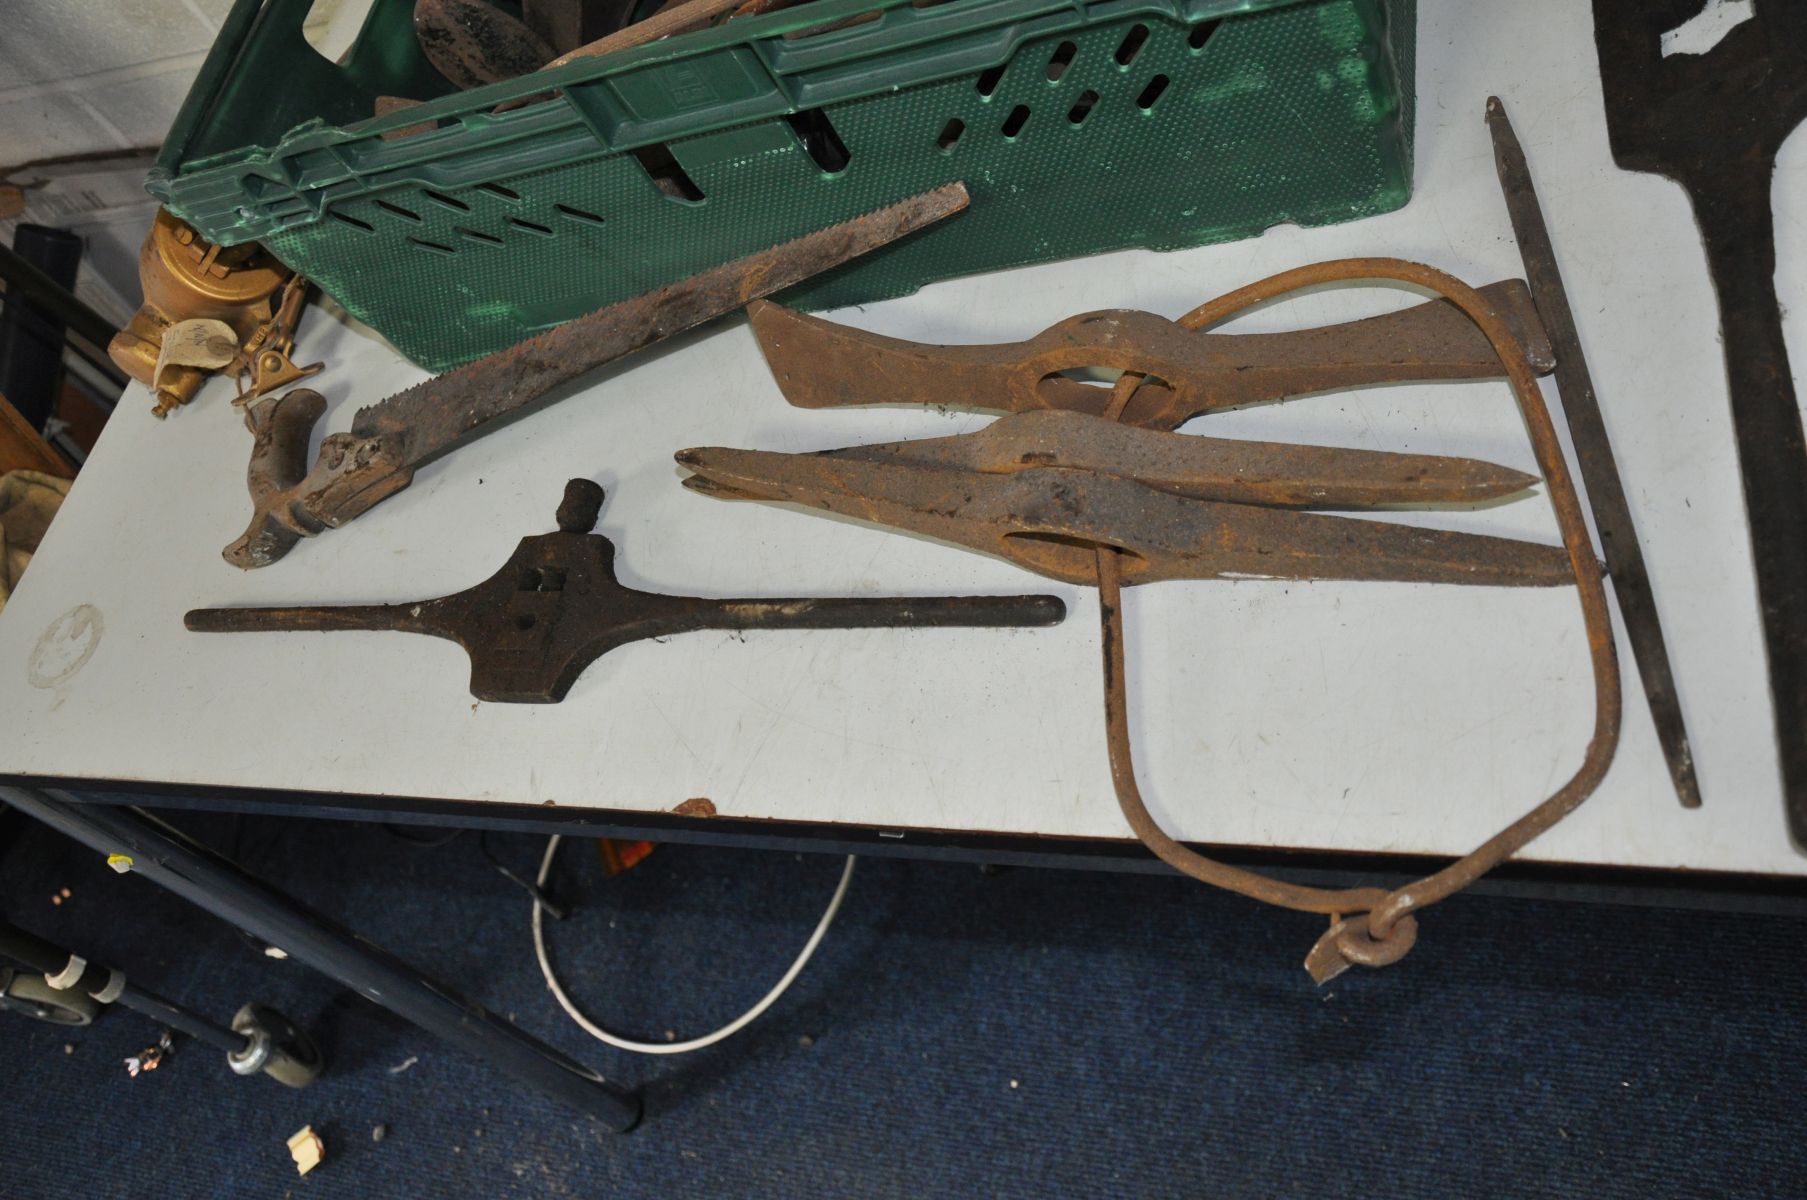 A TRAY CONTAINING VINTAGE TOOLS, door furniture, and fire furniture, including tap wrenches, show - Image 3 of 4